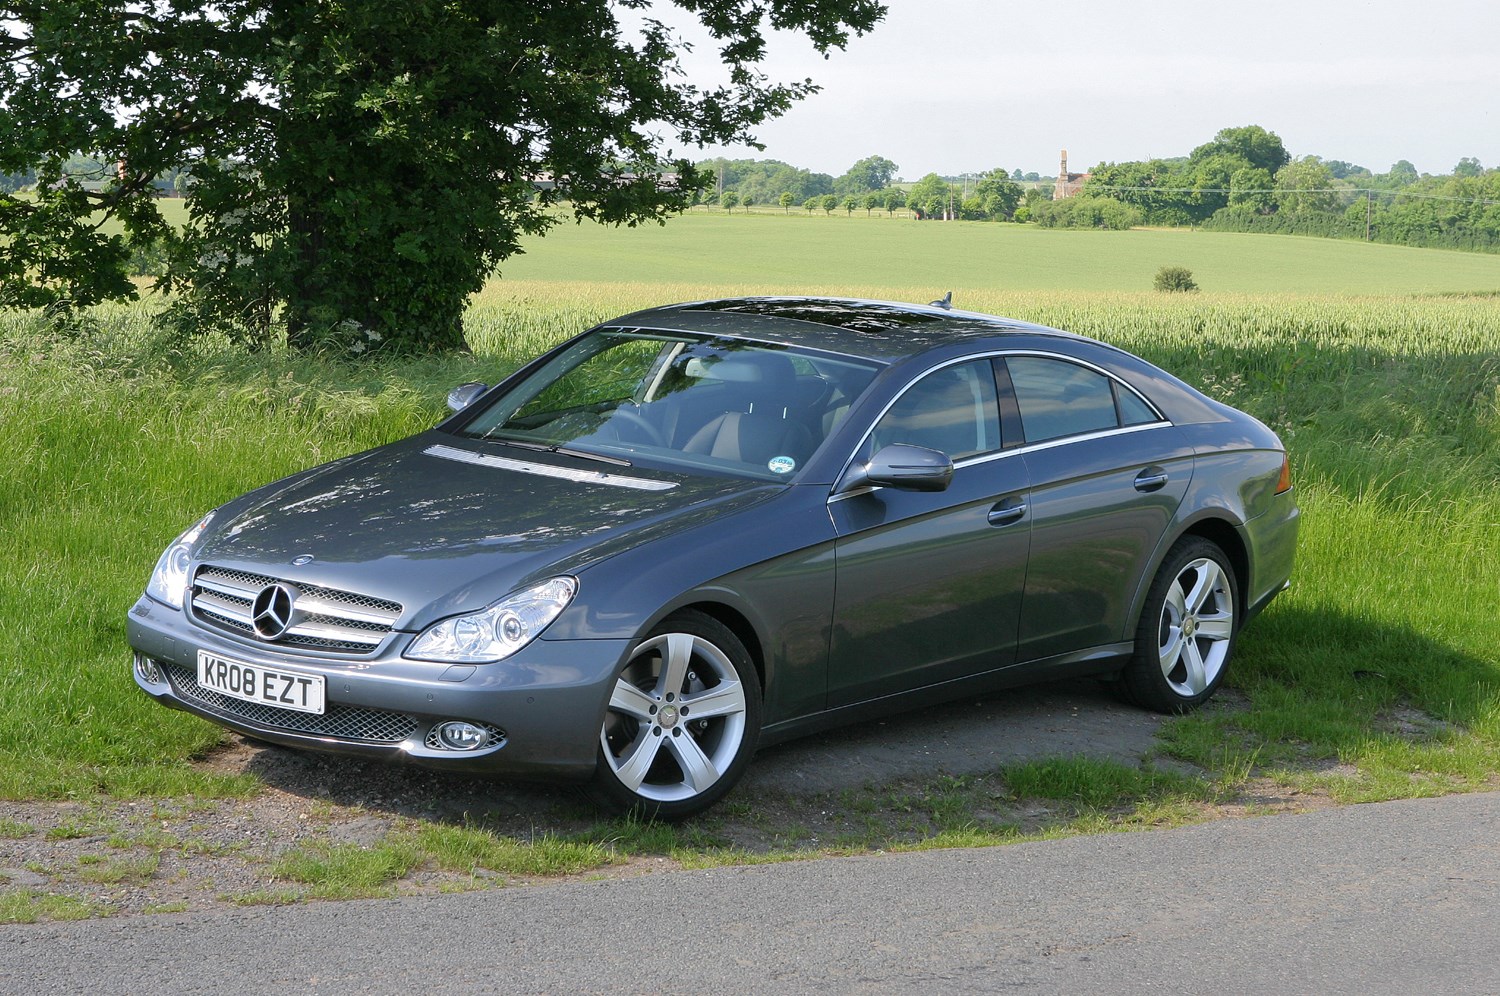 Mercedes Benz Cls Owners Manual